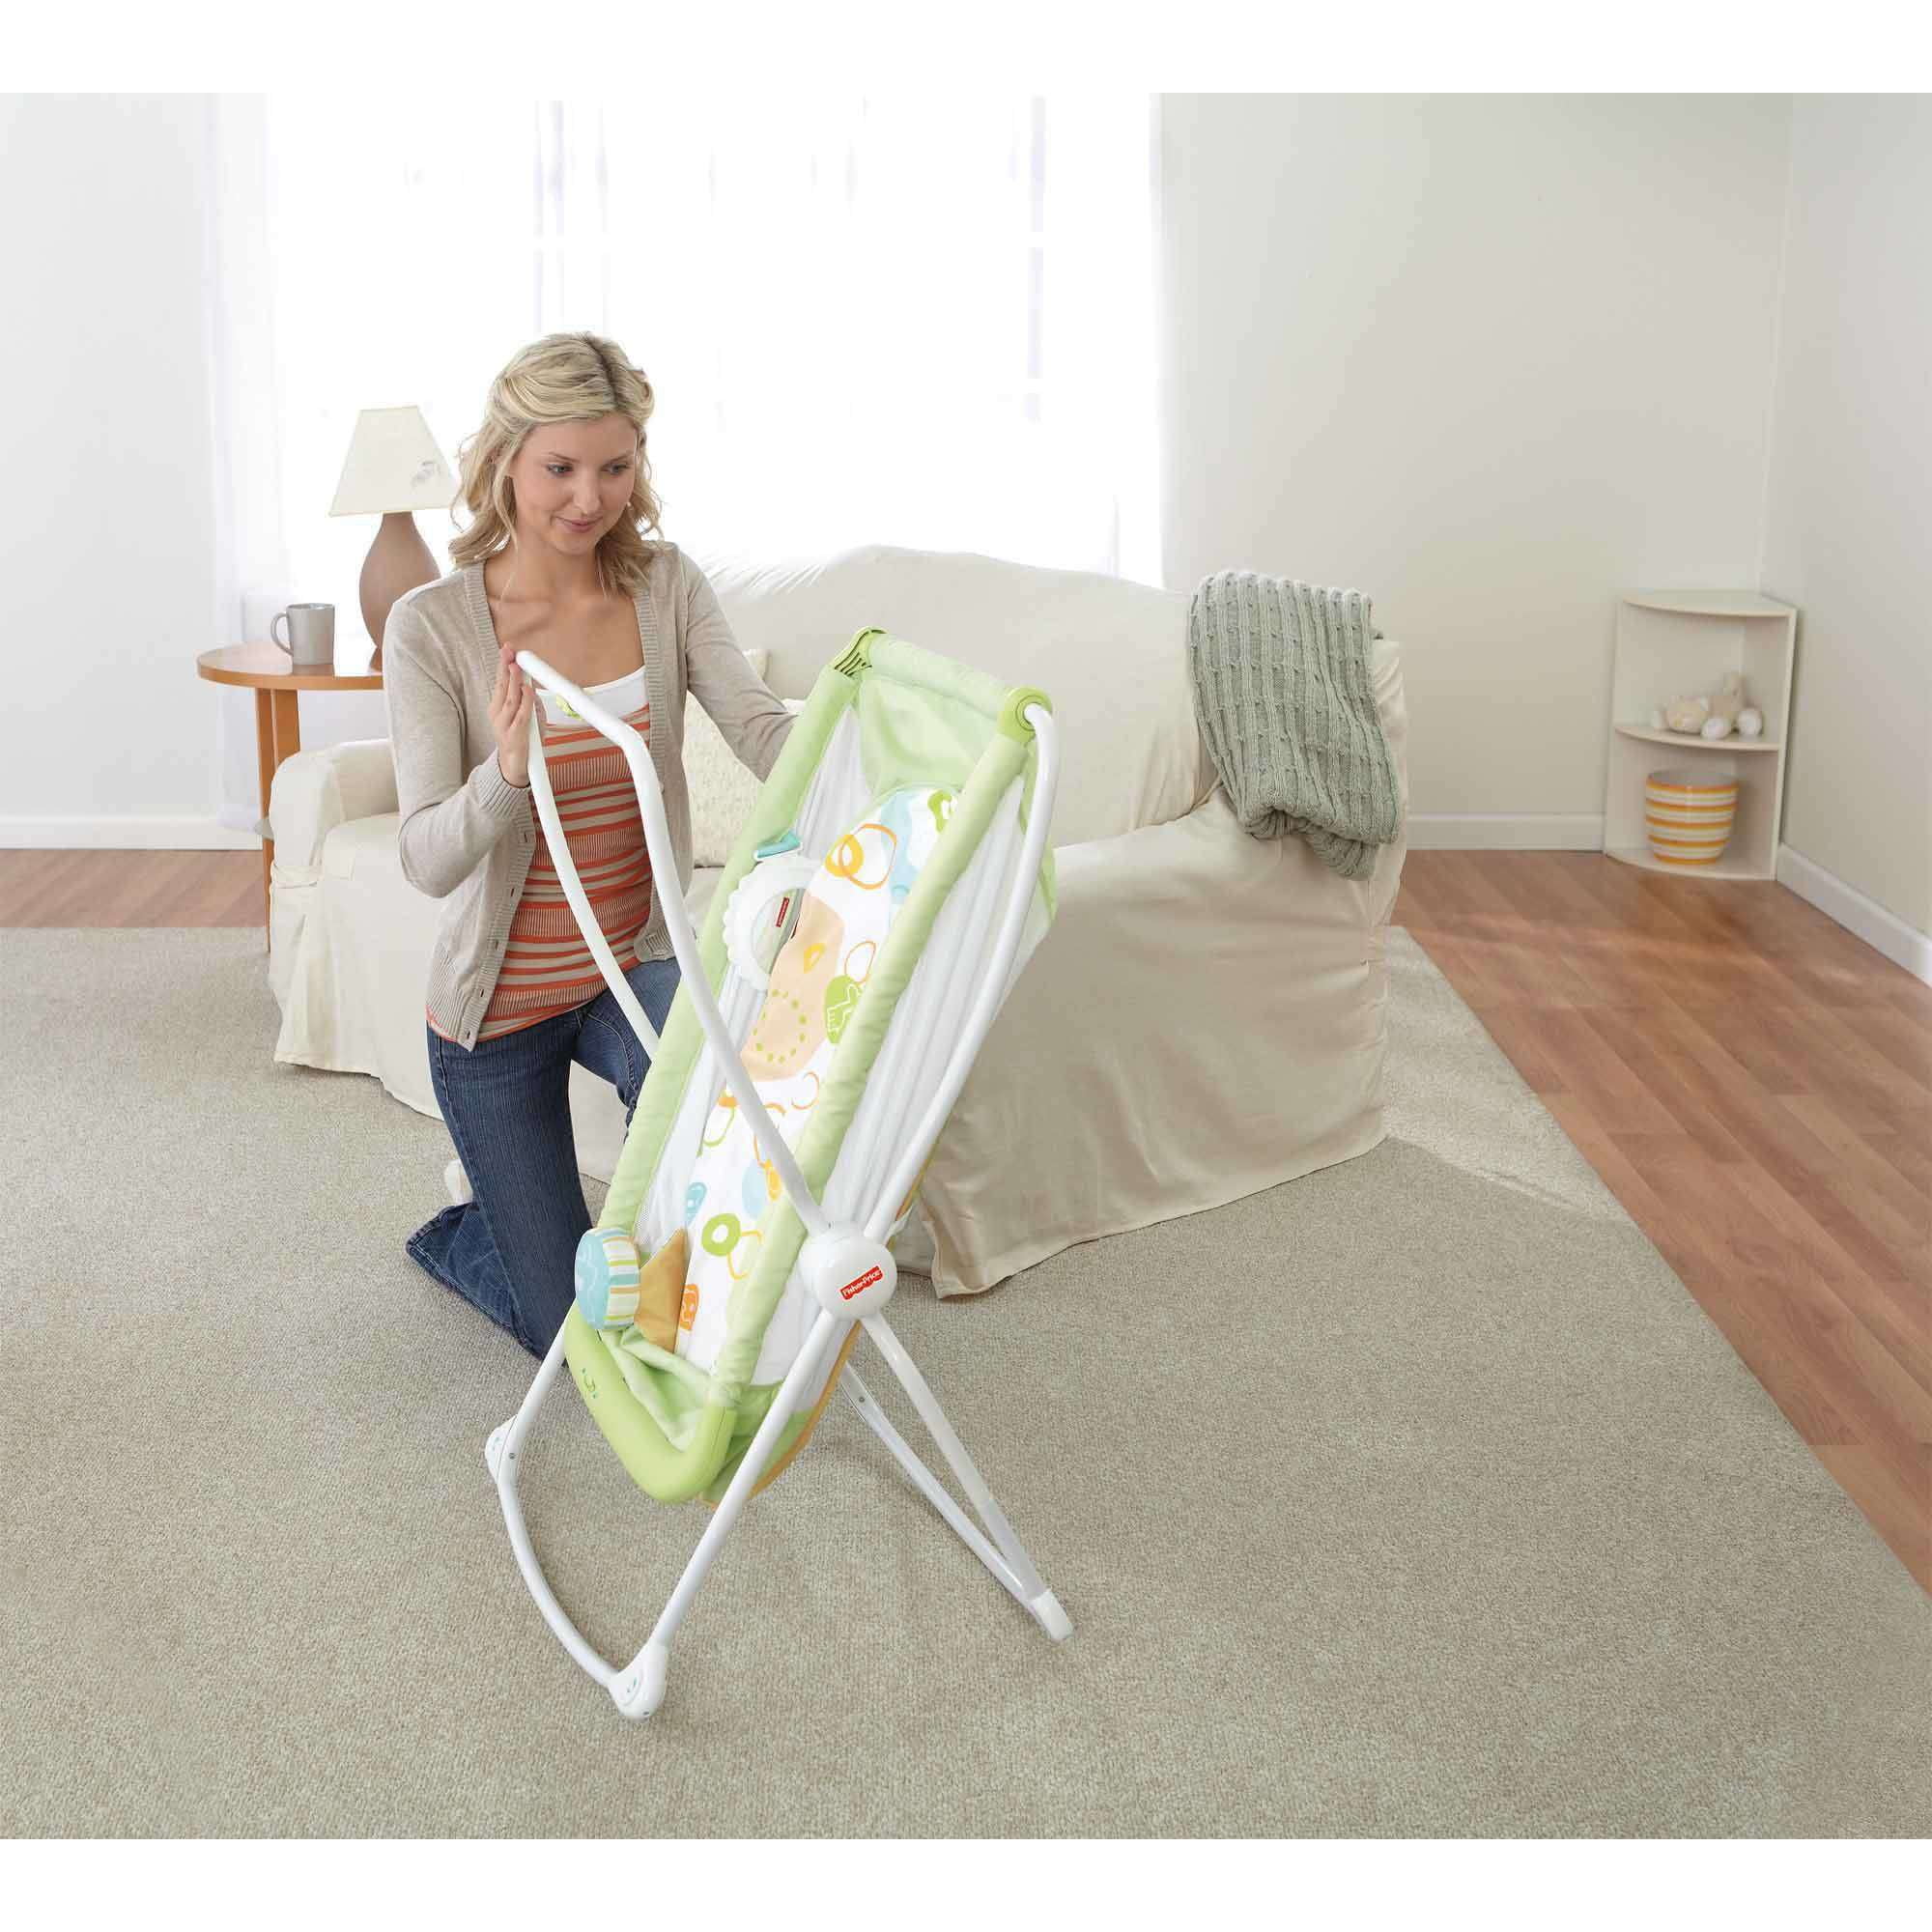 rock and play portable bassinet